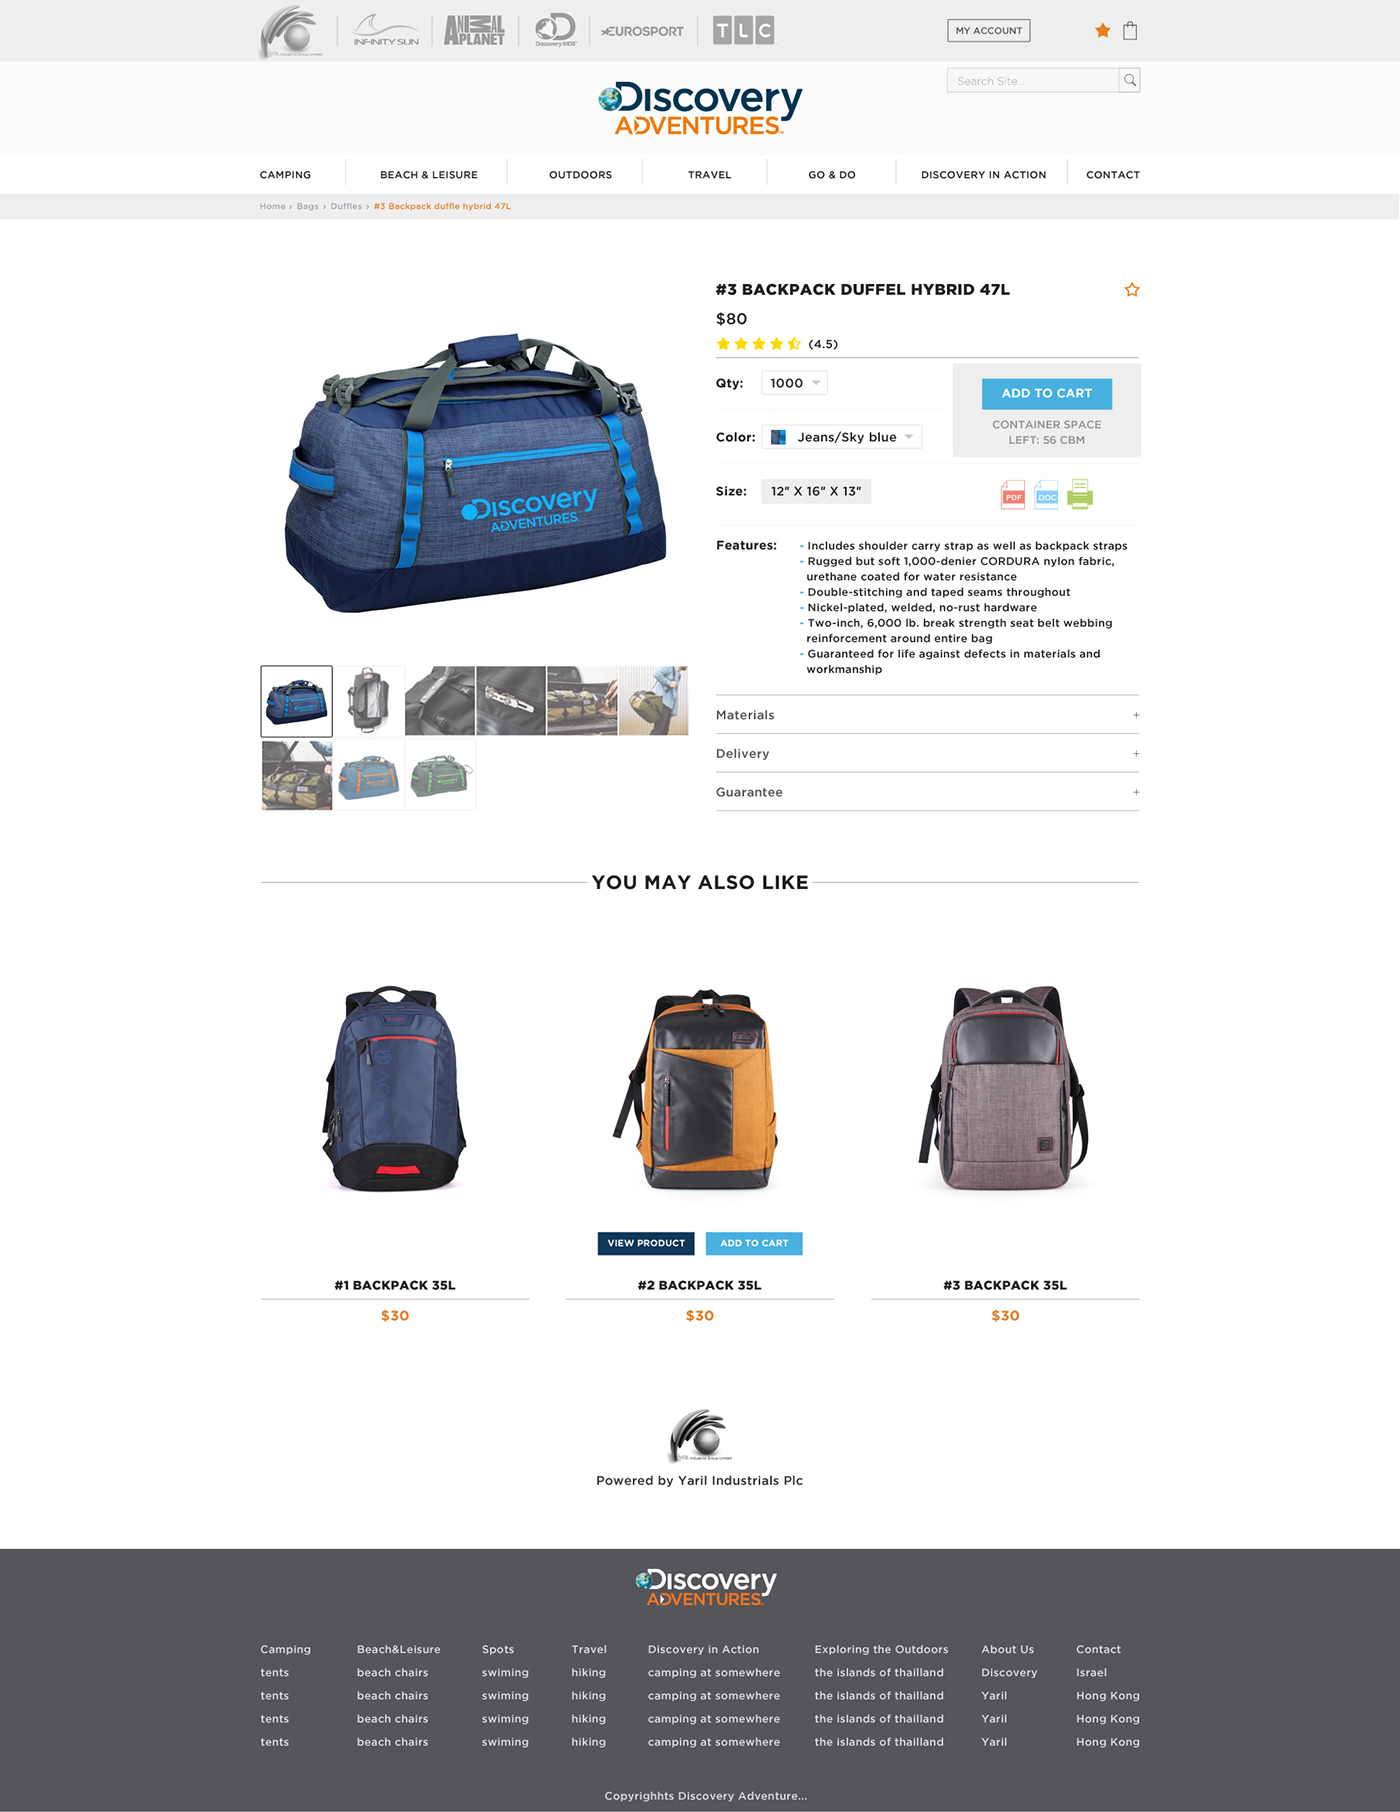 Website Design Website Travel Gear discovery adventures Shopping camping